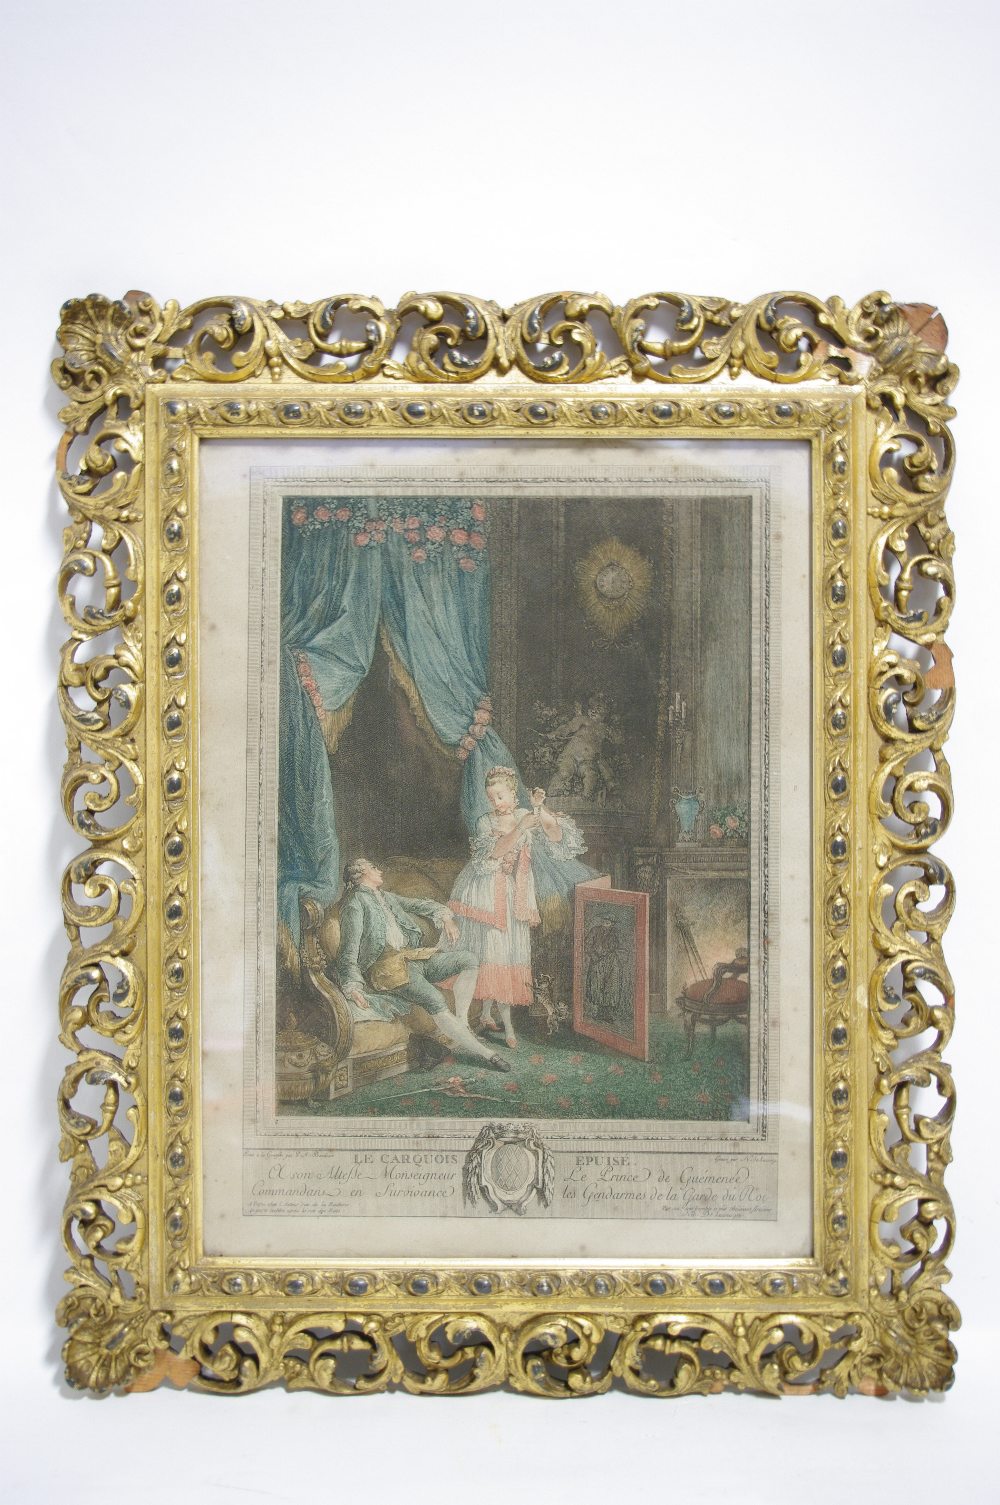 N. de LAUNAY, after S. FREUDBERG, & A.P. BAUDOUIN. A pair of 18th century coloured engravings - Image 3 of 4